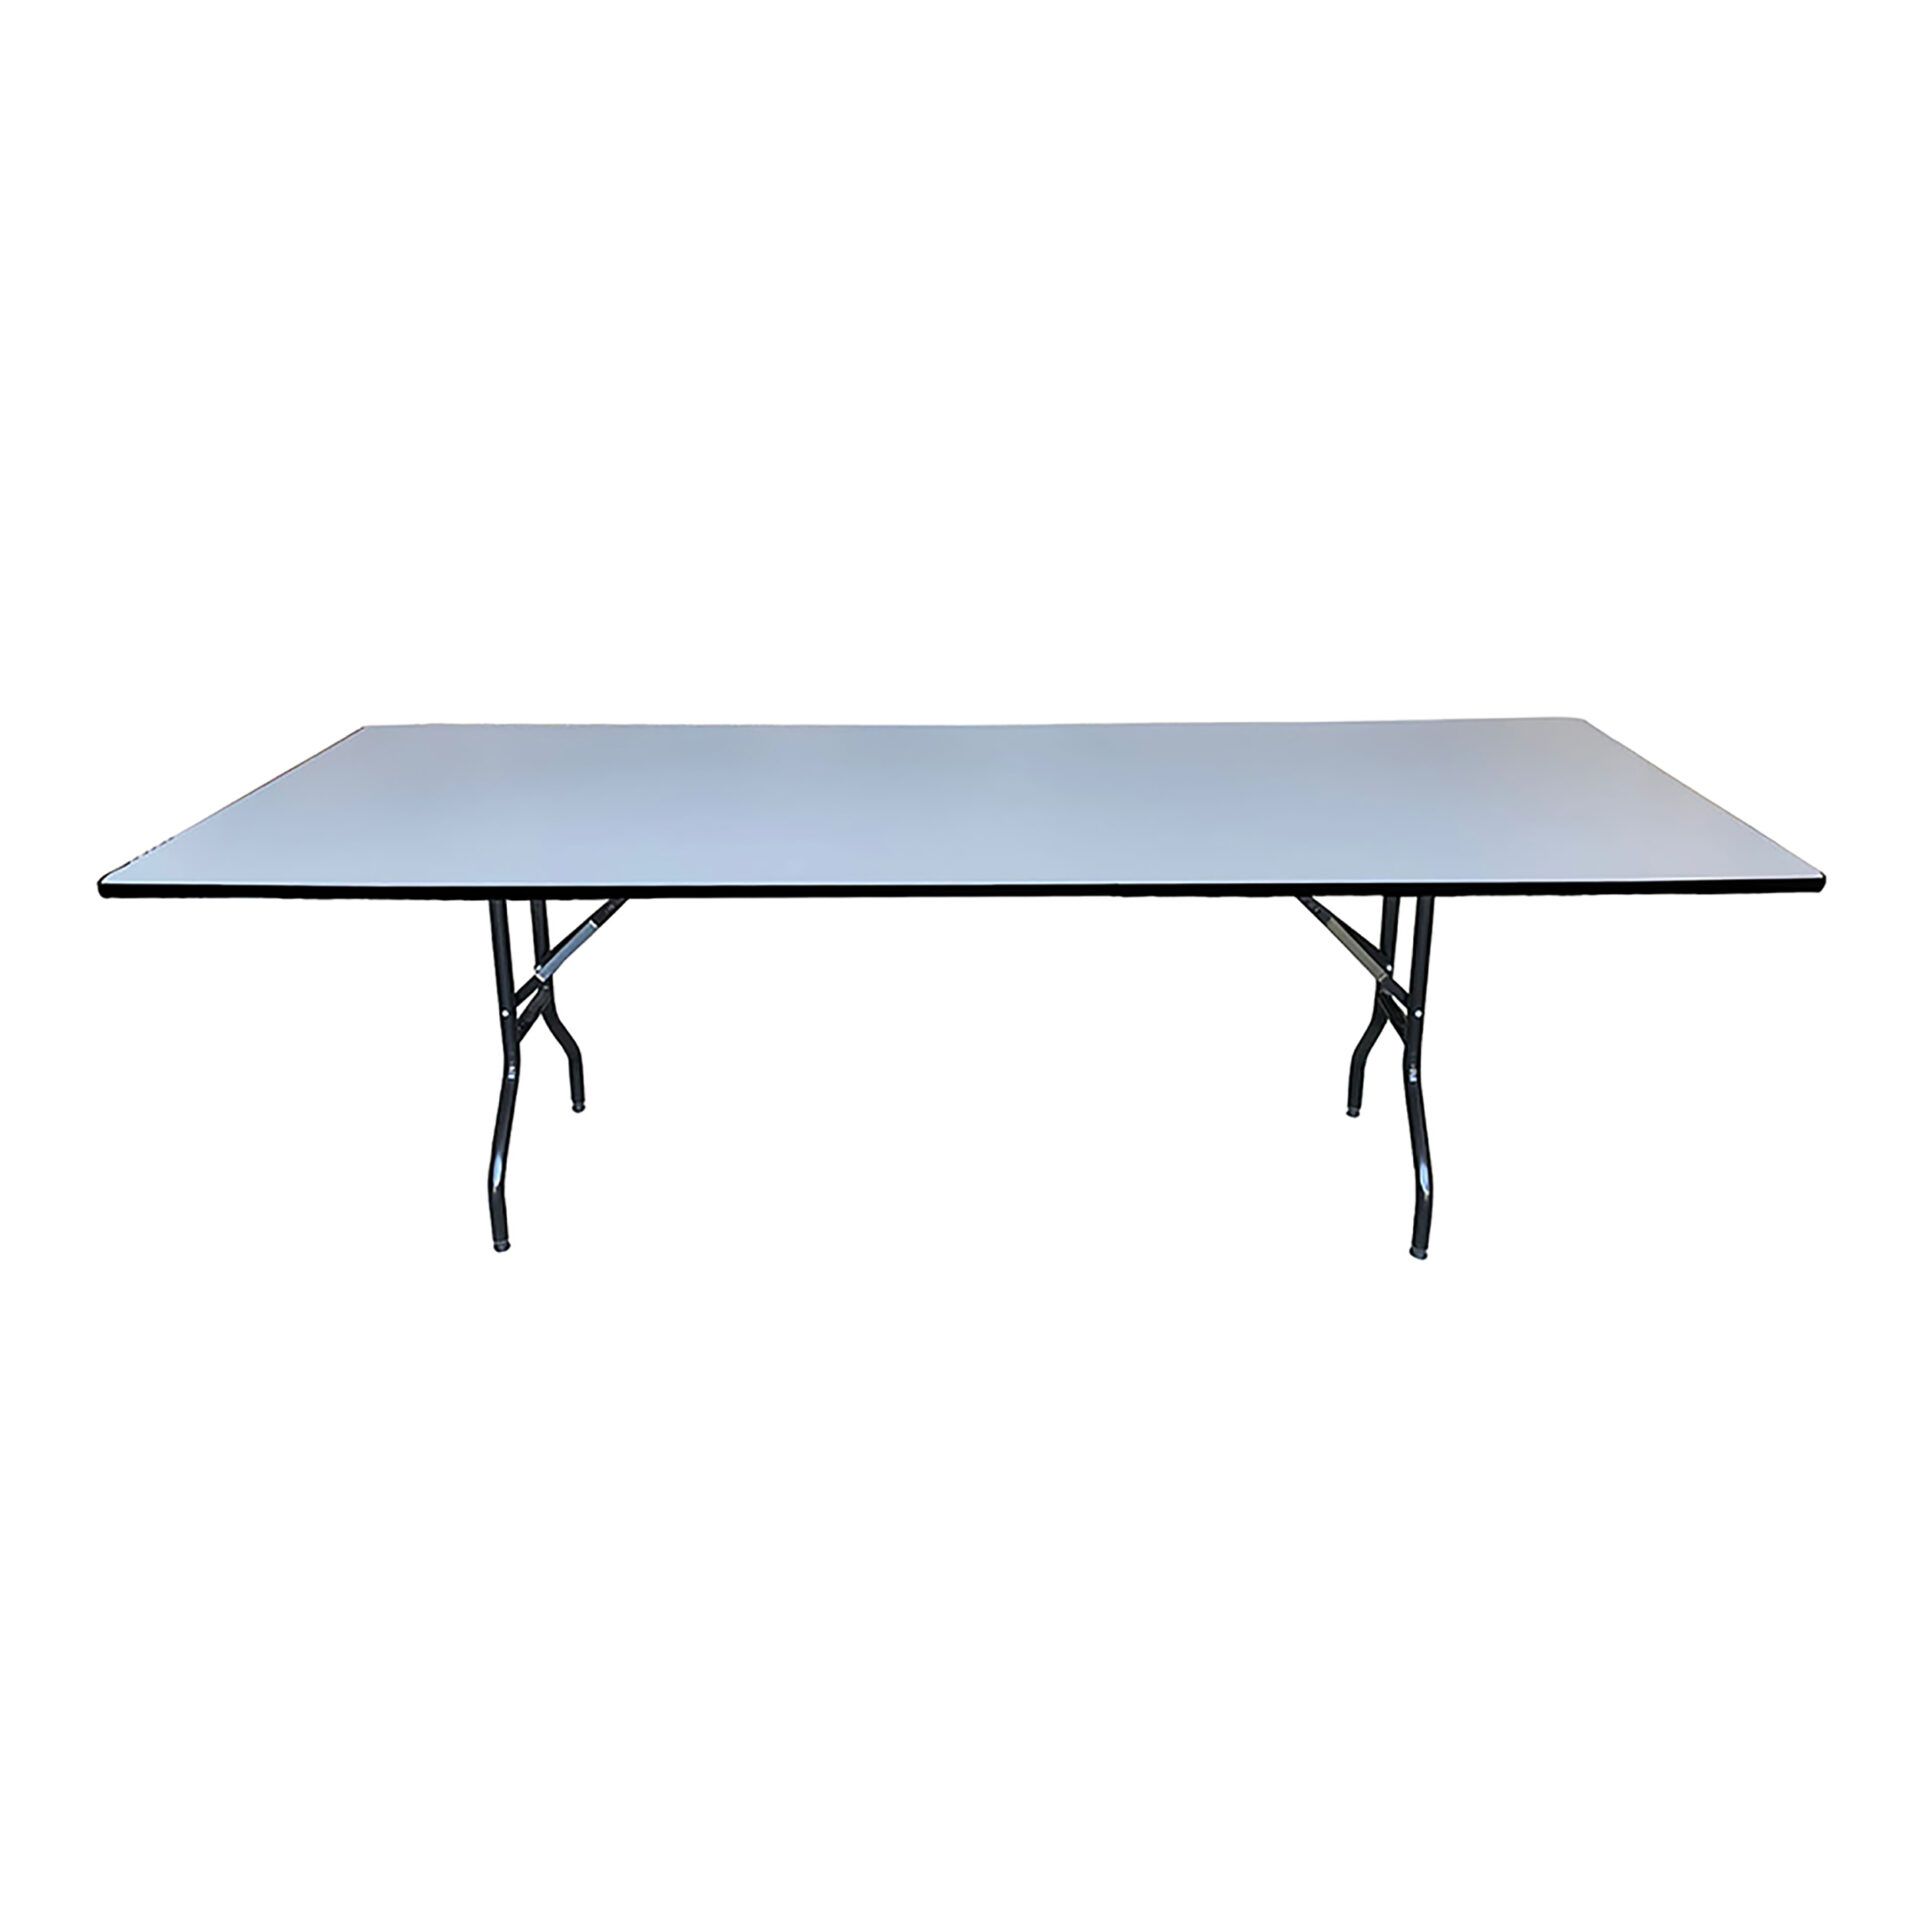 Deluxe Banquet Table 2400x900 Rectangle - White